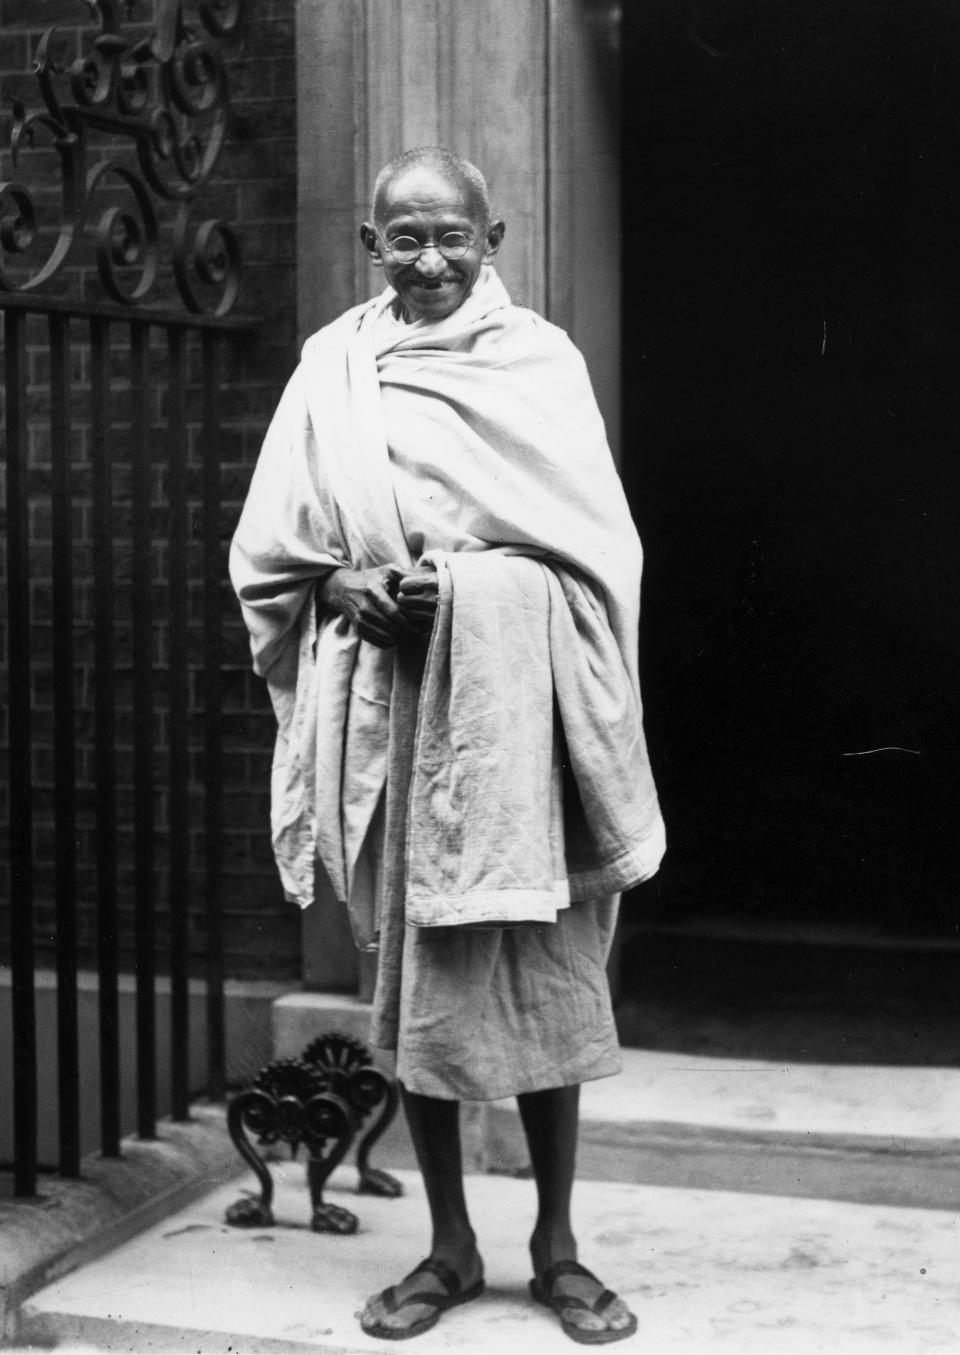 3rd November 1931: Indian leader Mahatma Gandhi (Mohandas Karamchand Gandhi), outside 10 Downing Street, London. He is in London to attend the Round Table Conference on Indian constitutional reform. (Photo by Central Press/Getty Images)